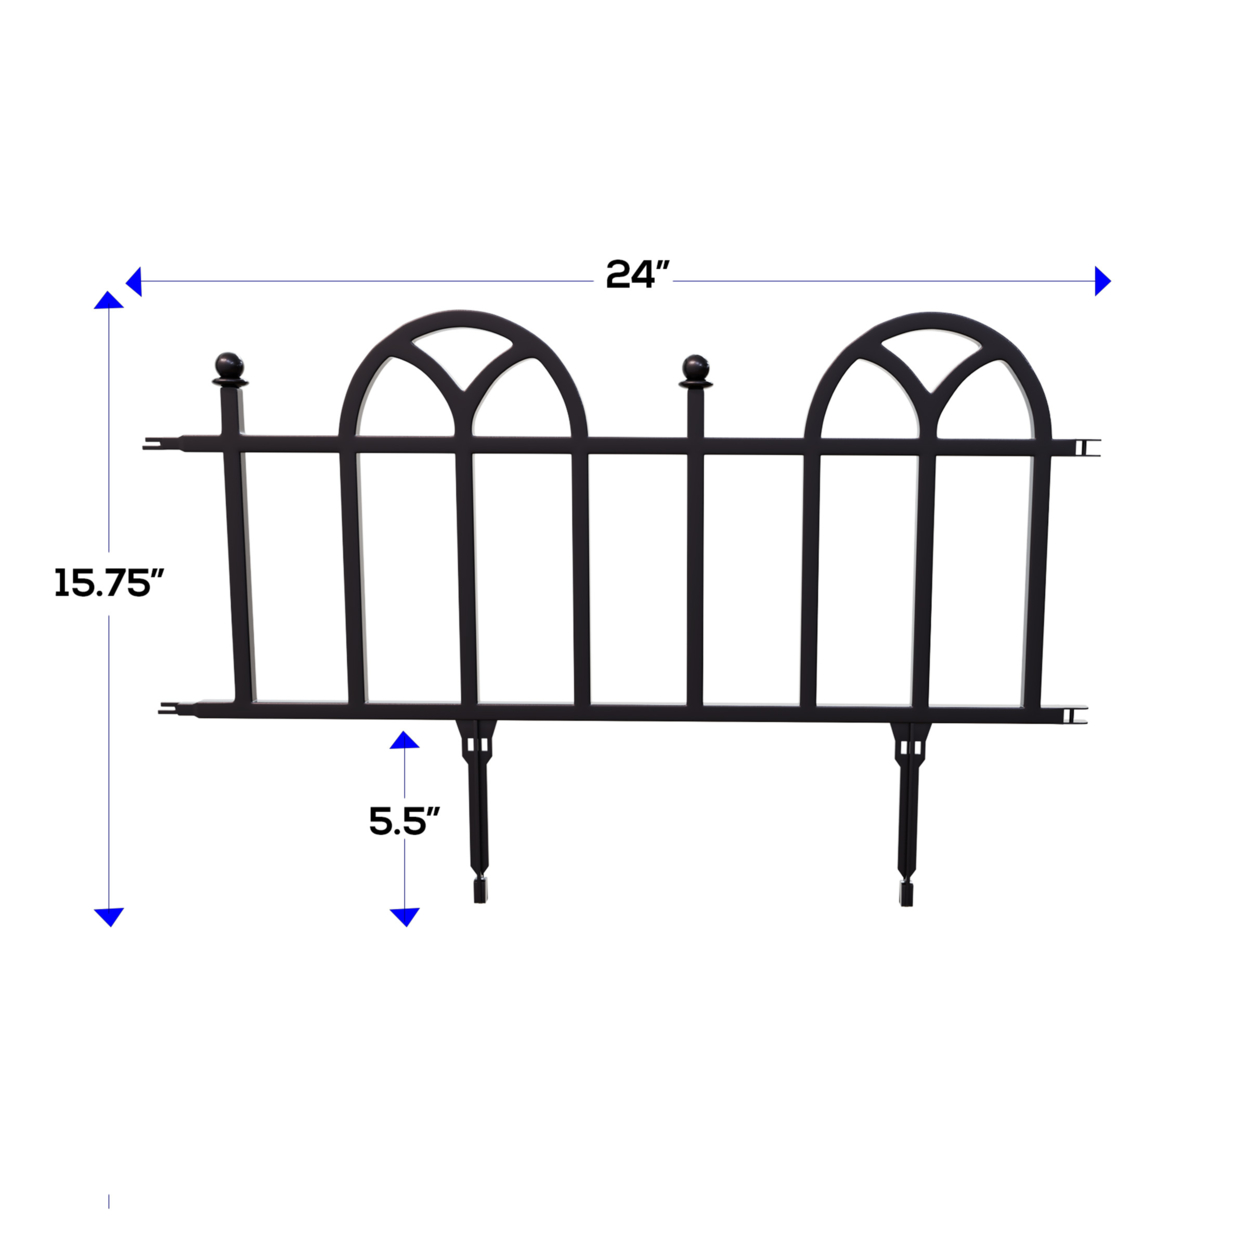 Garden Edging Border- Flower Bed Edging For Landscaping- Victorian Fence, 8 Feet Of Interlocking Outdoor Lawn Stakes